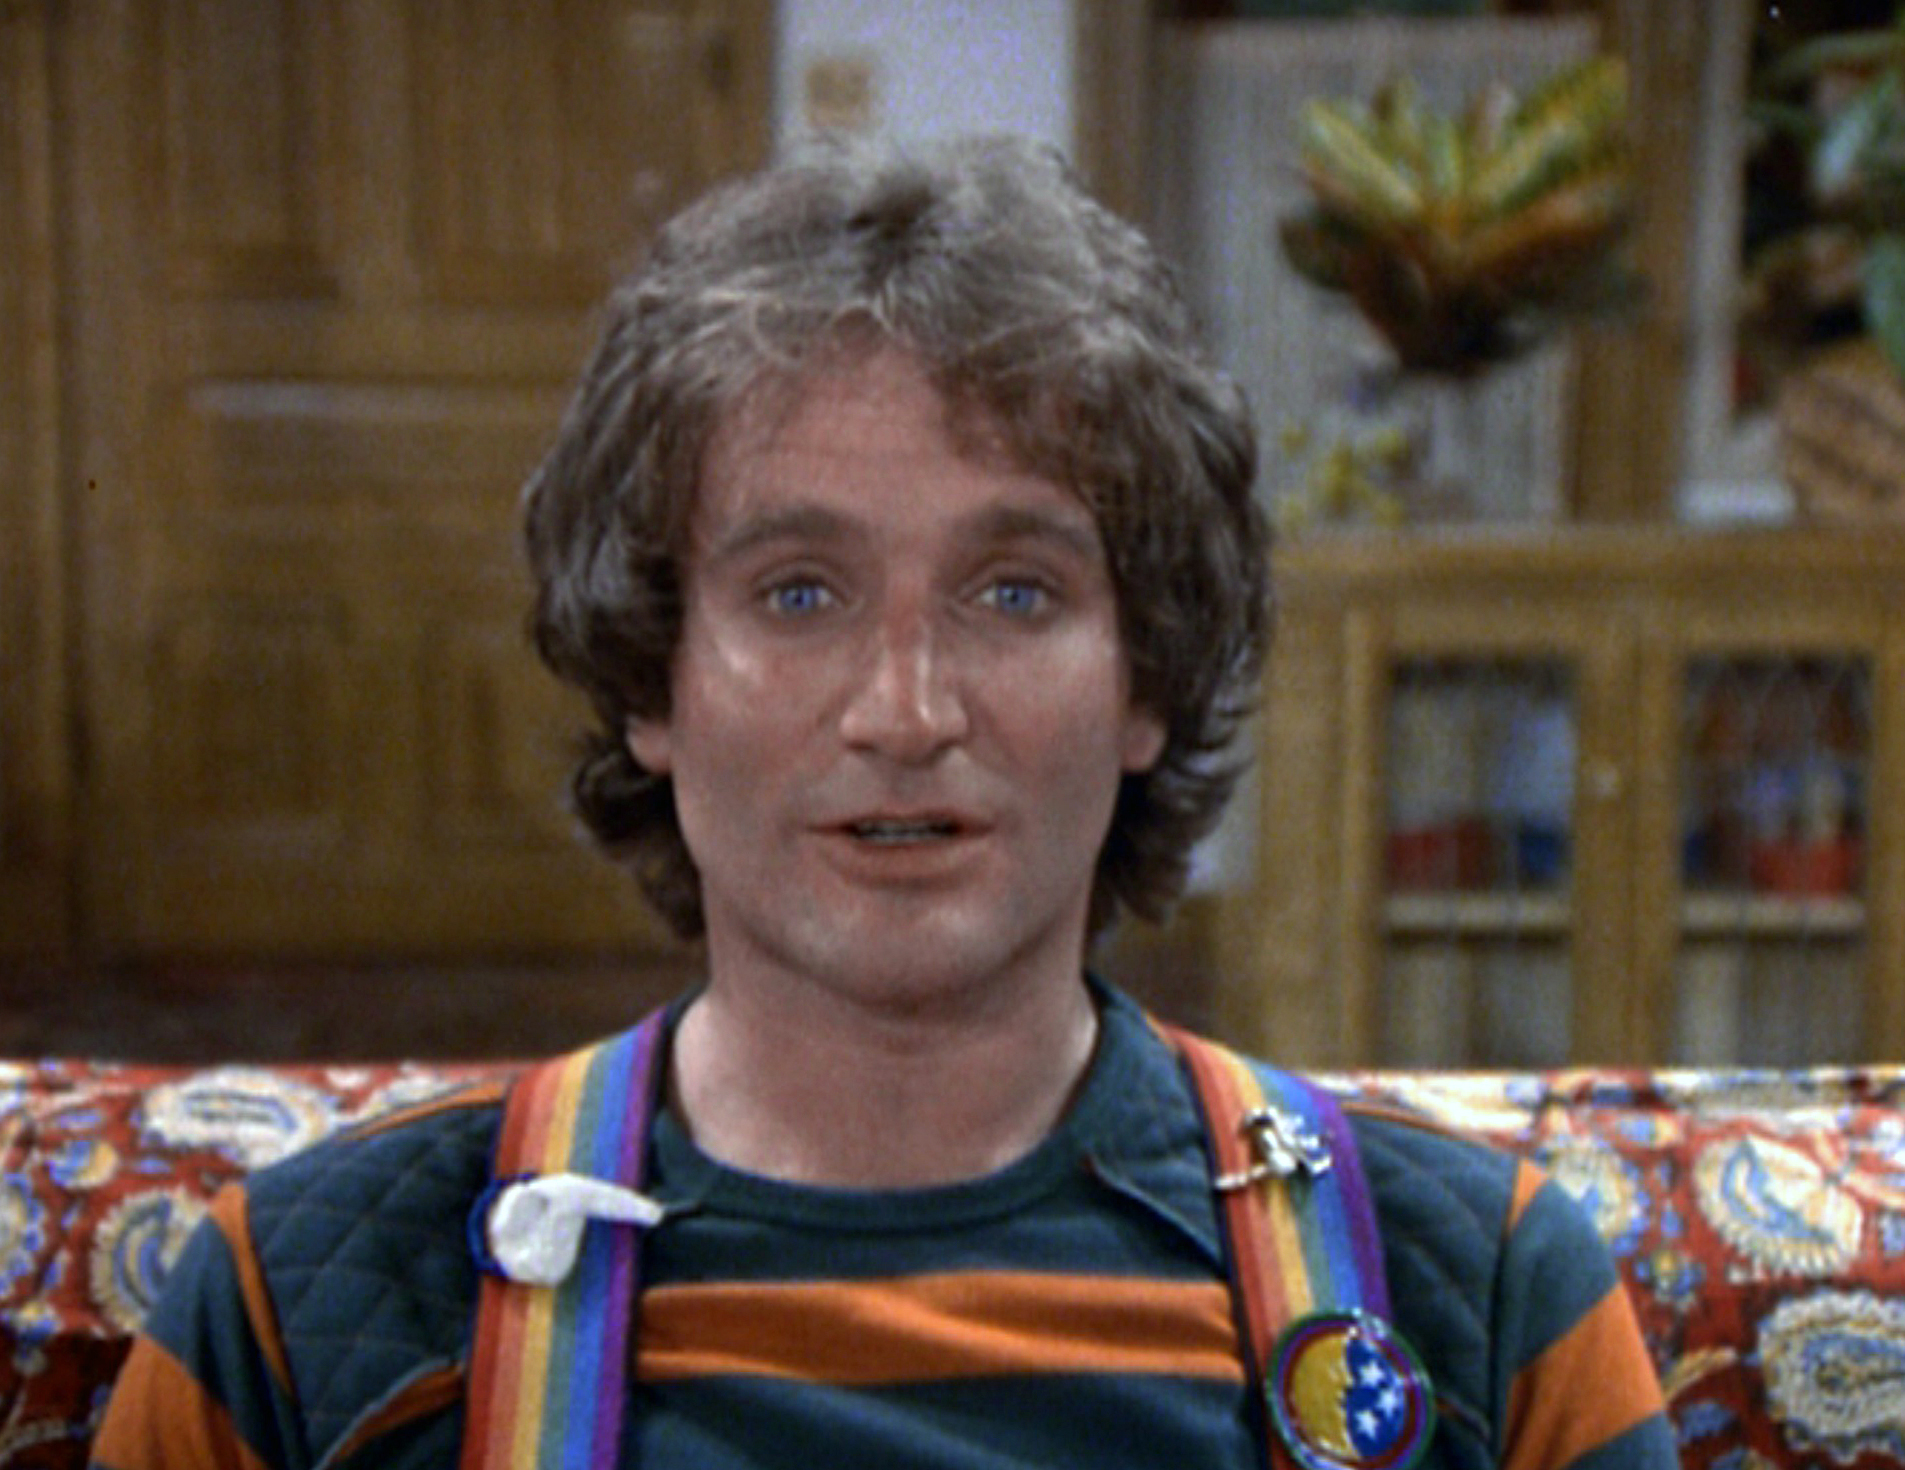 Robin Williams as Mork in "Mork and Mindy" | Source: Getty Images